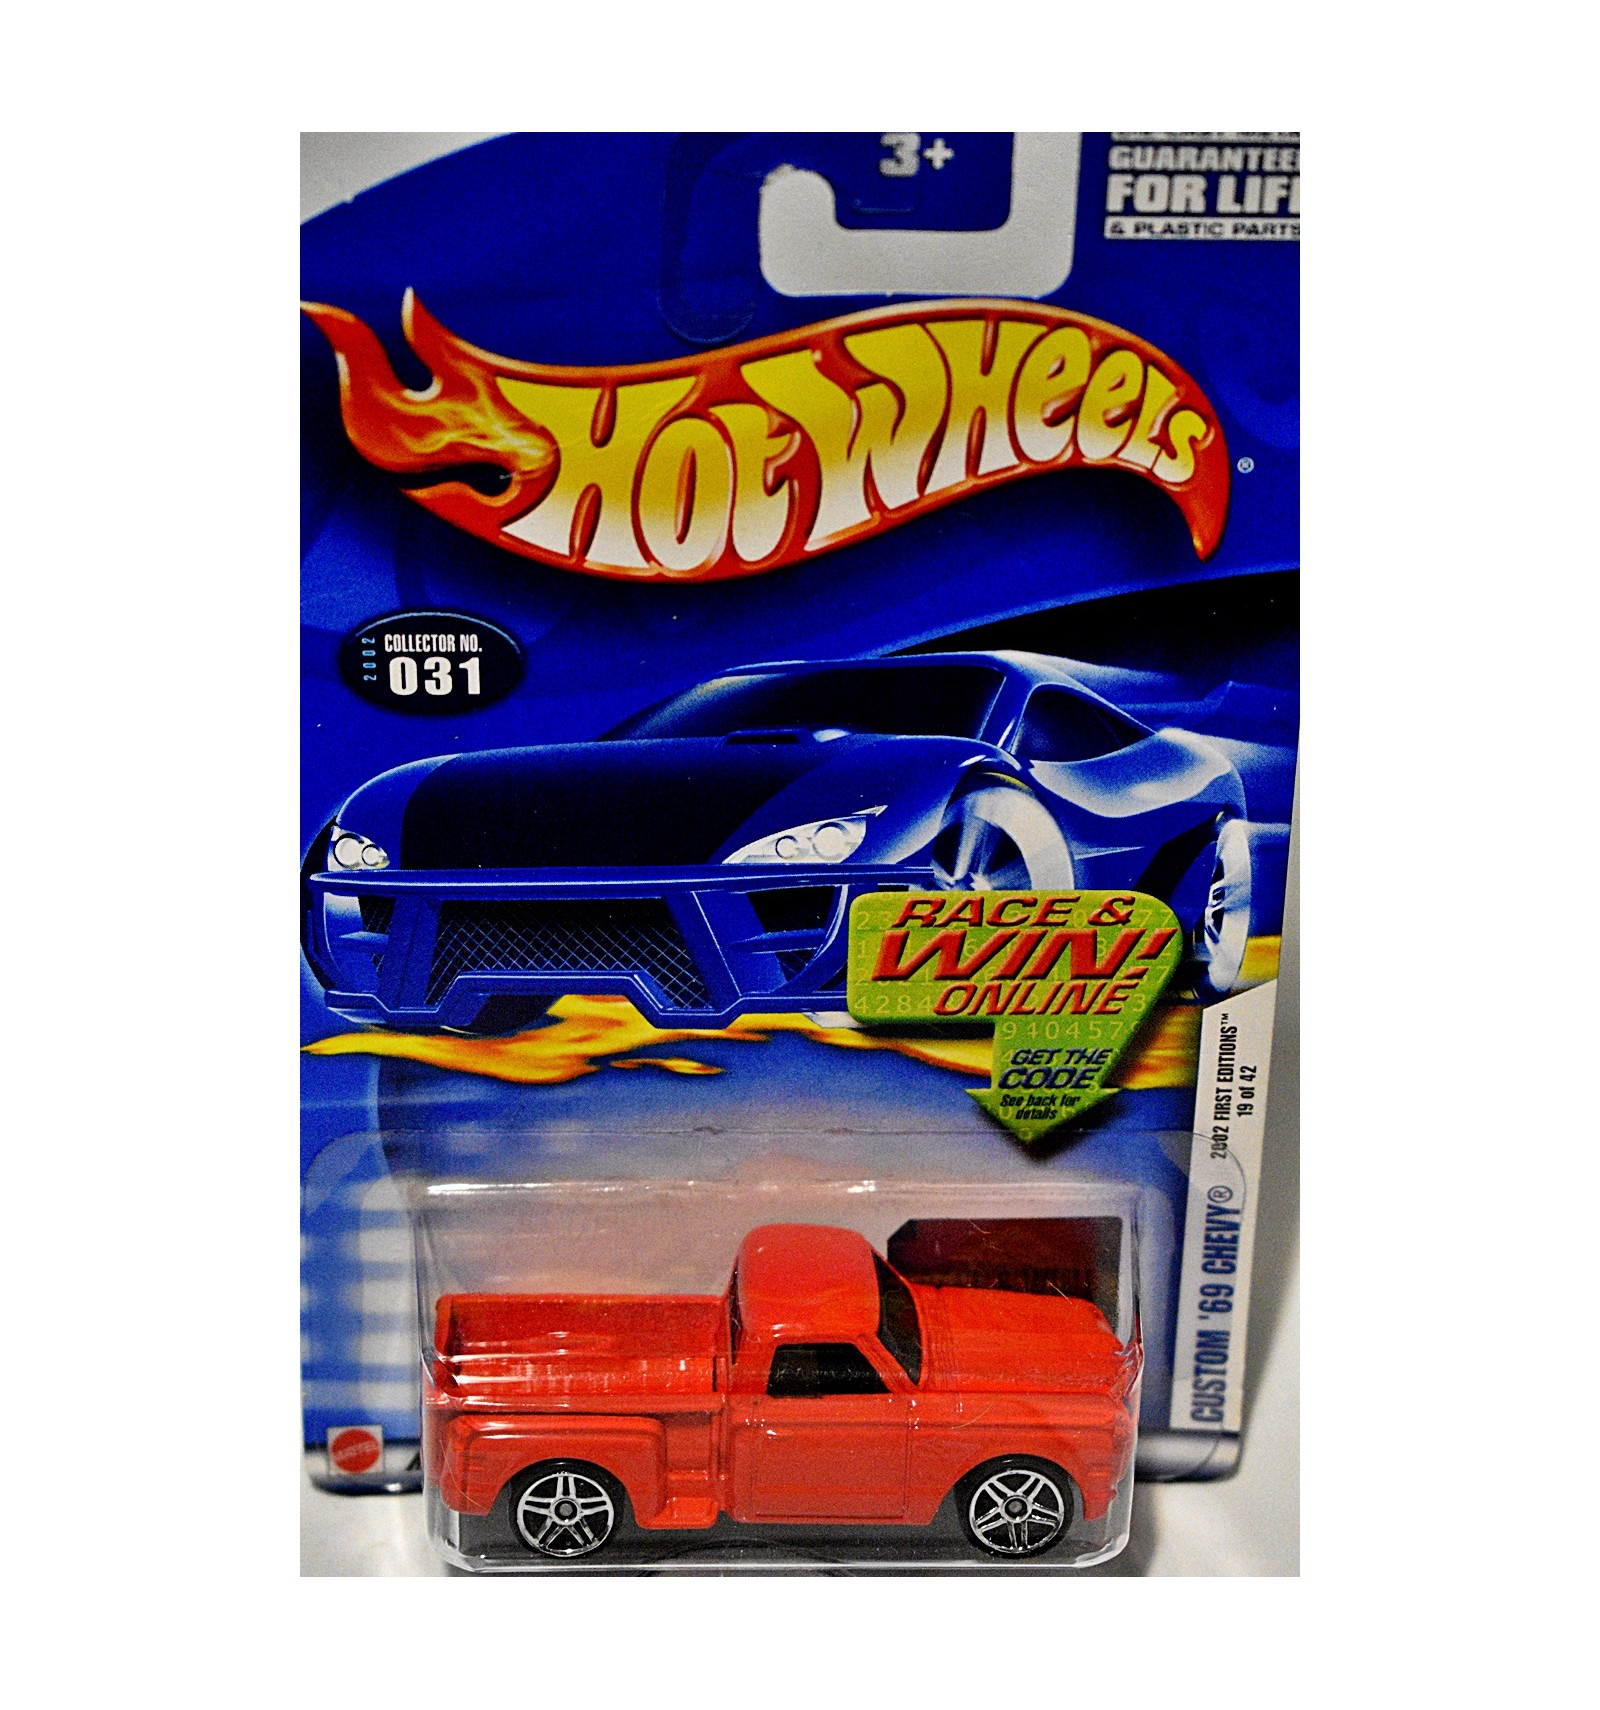 HOT WHEELS 1969 CHEVROLET CHEVY PICKUP TRUCK FIRST EDITION NEW IN 2002 PACKAGE 